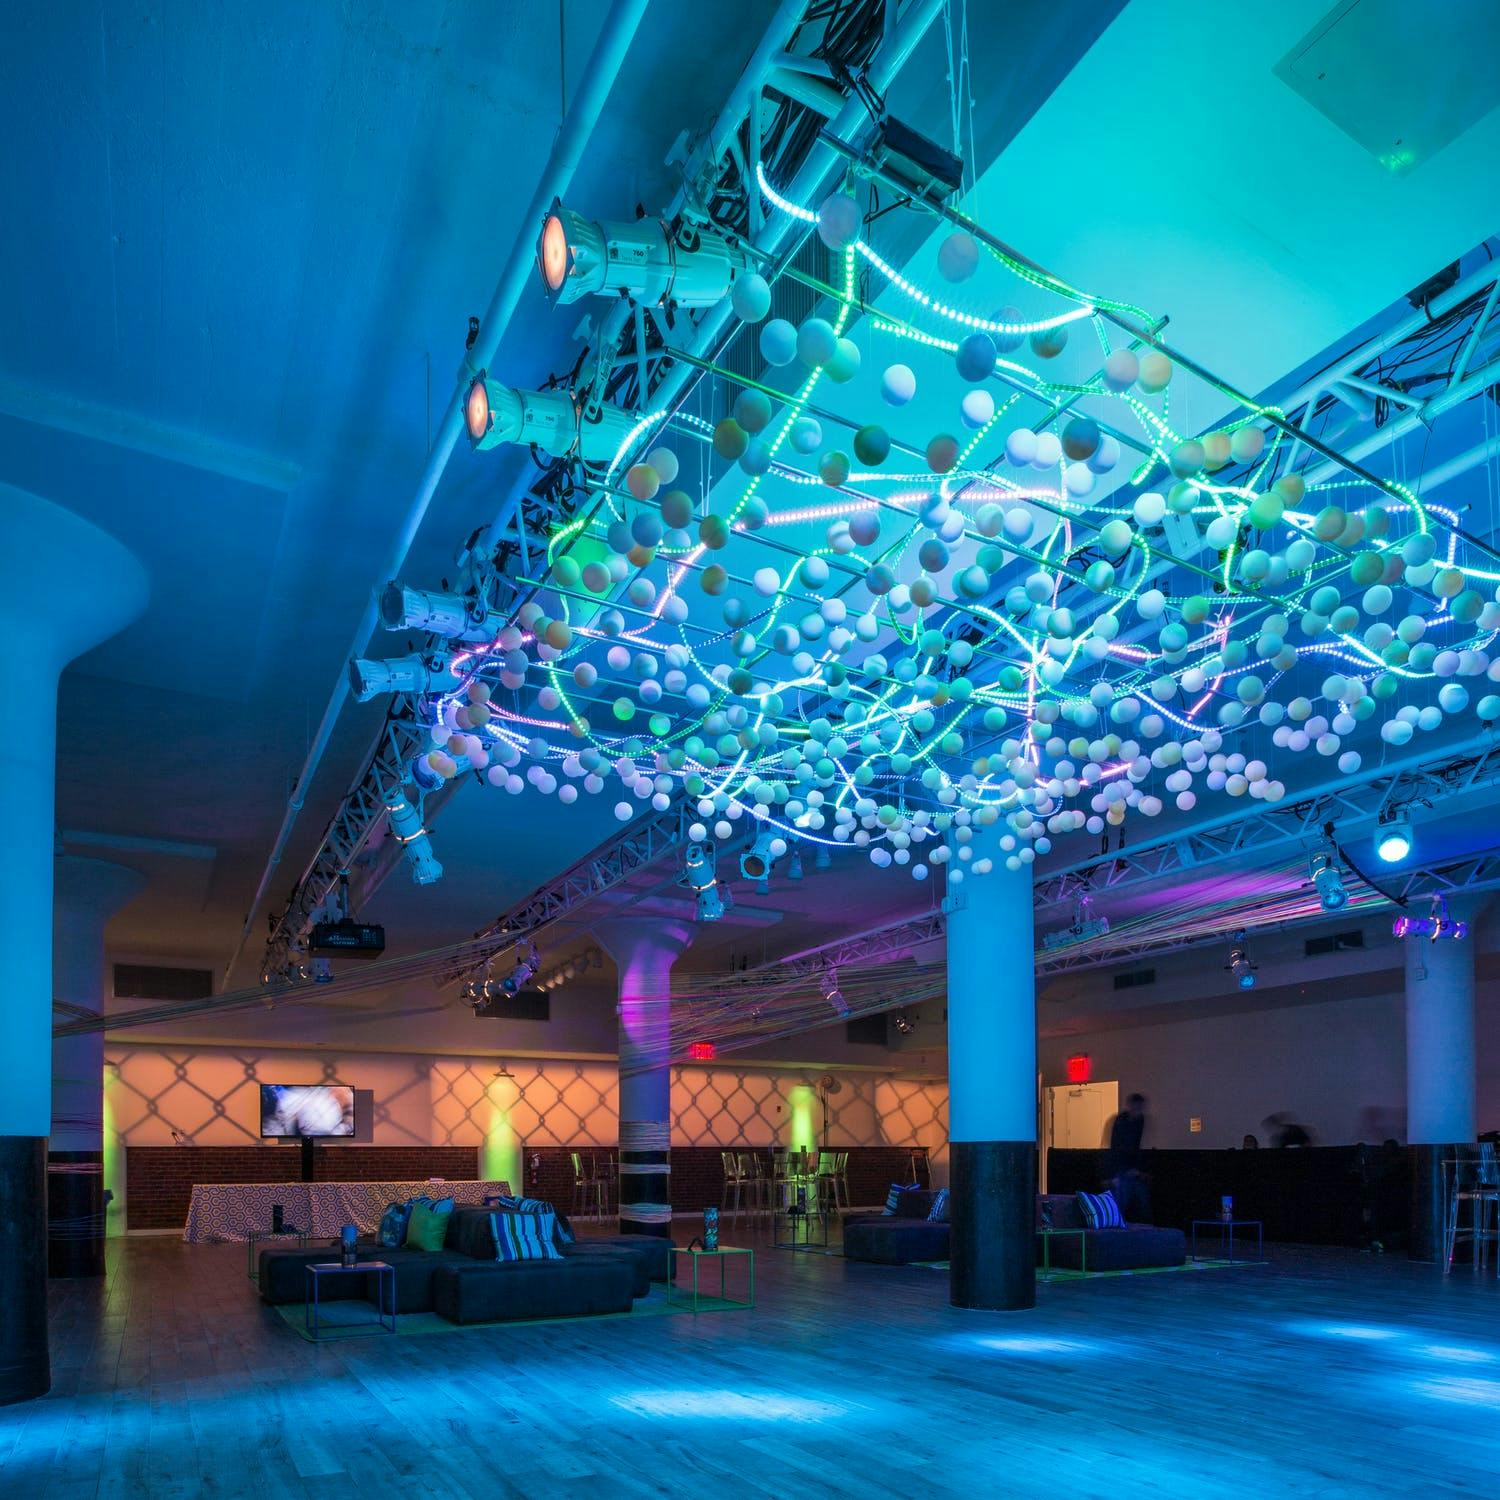 Neon Party With LED Ceiling Installation | PartySlate